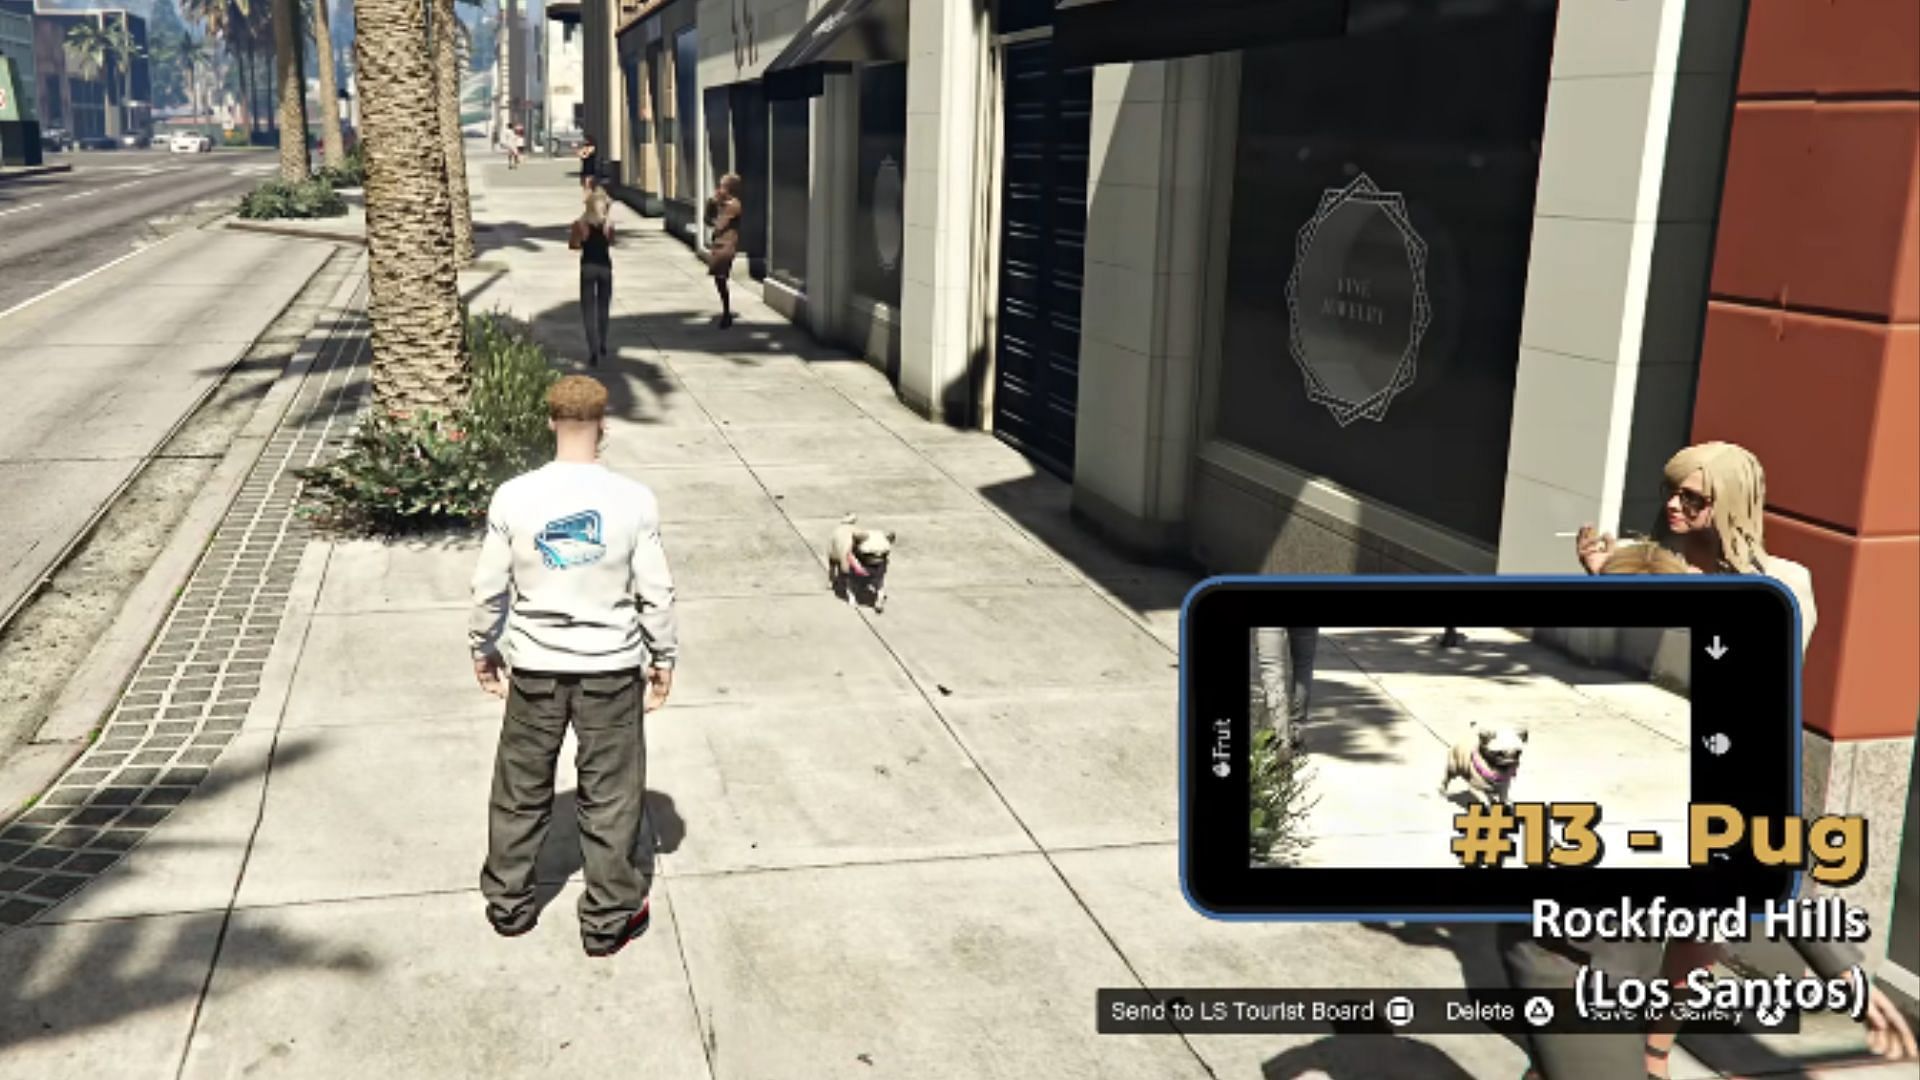 Take a picture of the Pug and send it to the LS Tourist Board for cash and RP (Image via YouTube/GTA Series Videos)